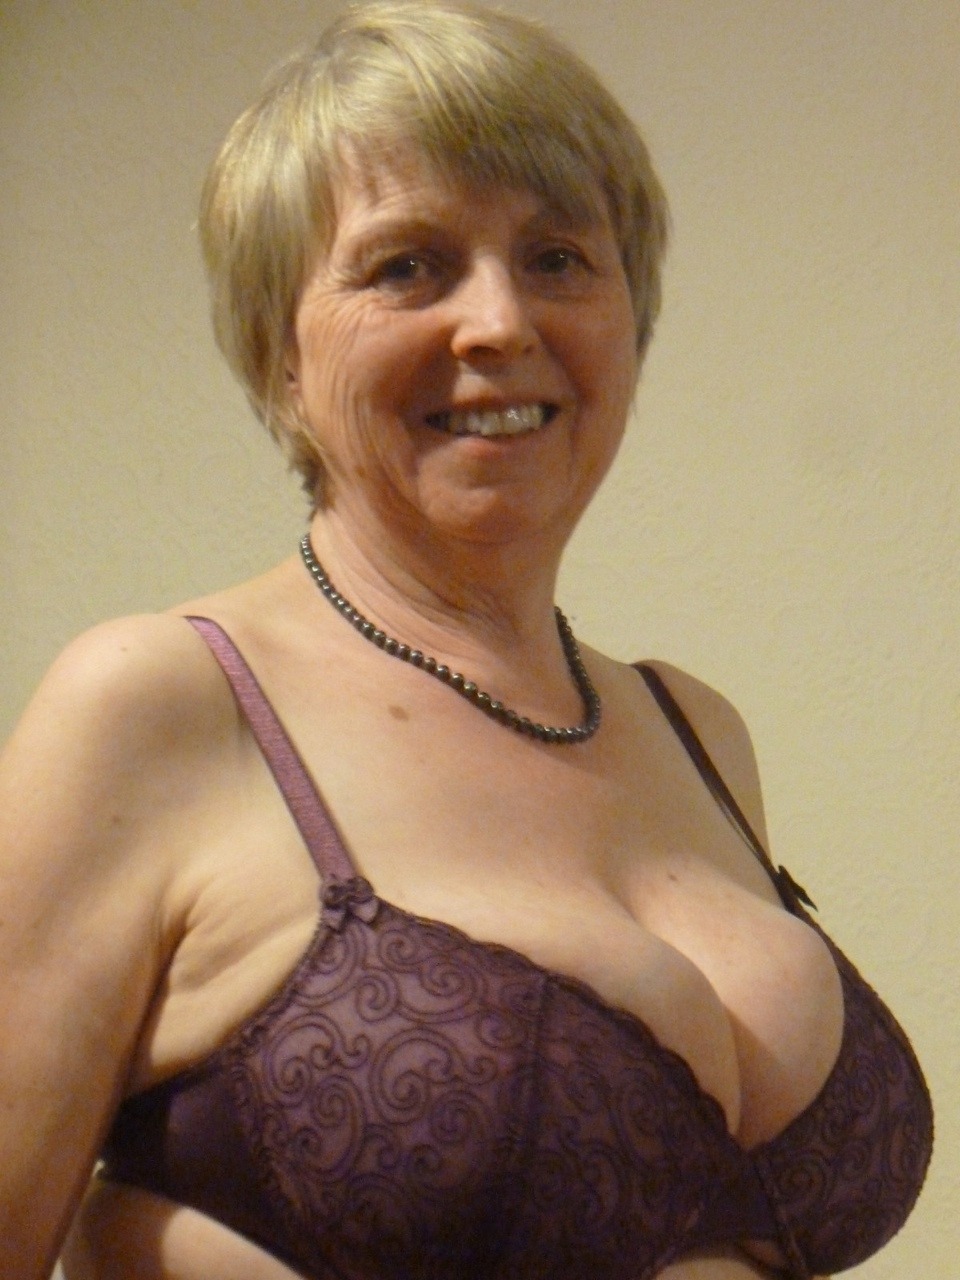 Gorgeous sexy granny with a bra full of succulent breast!Find your sexy senior partner